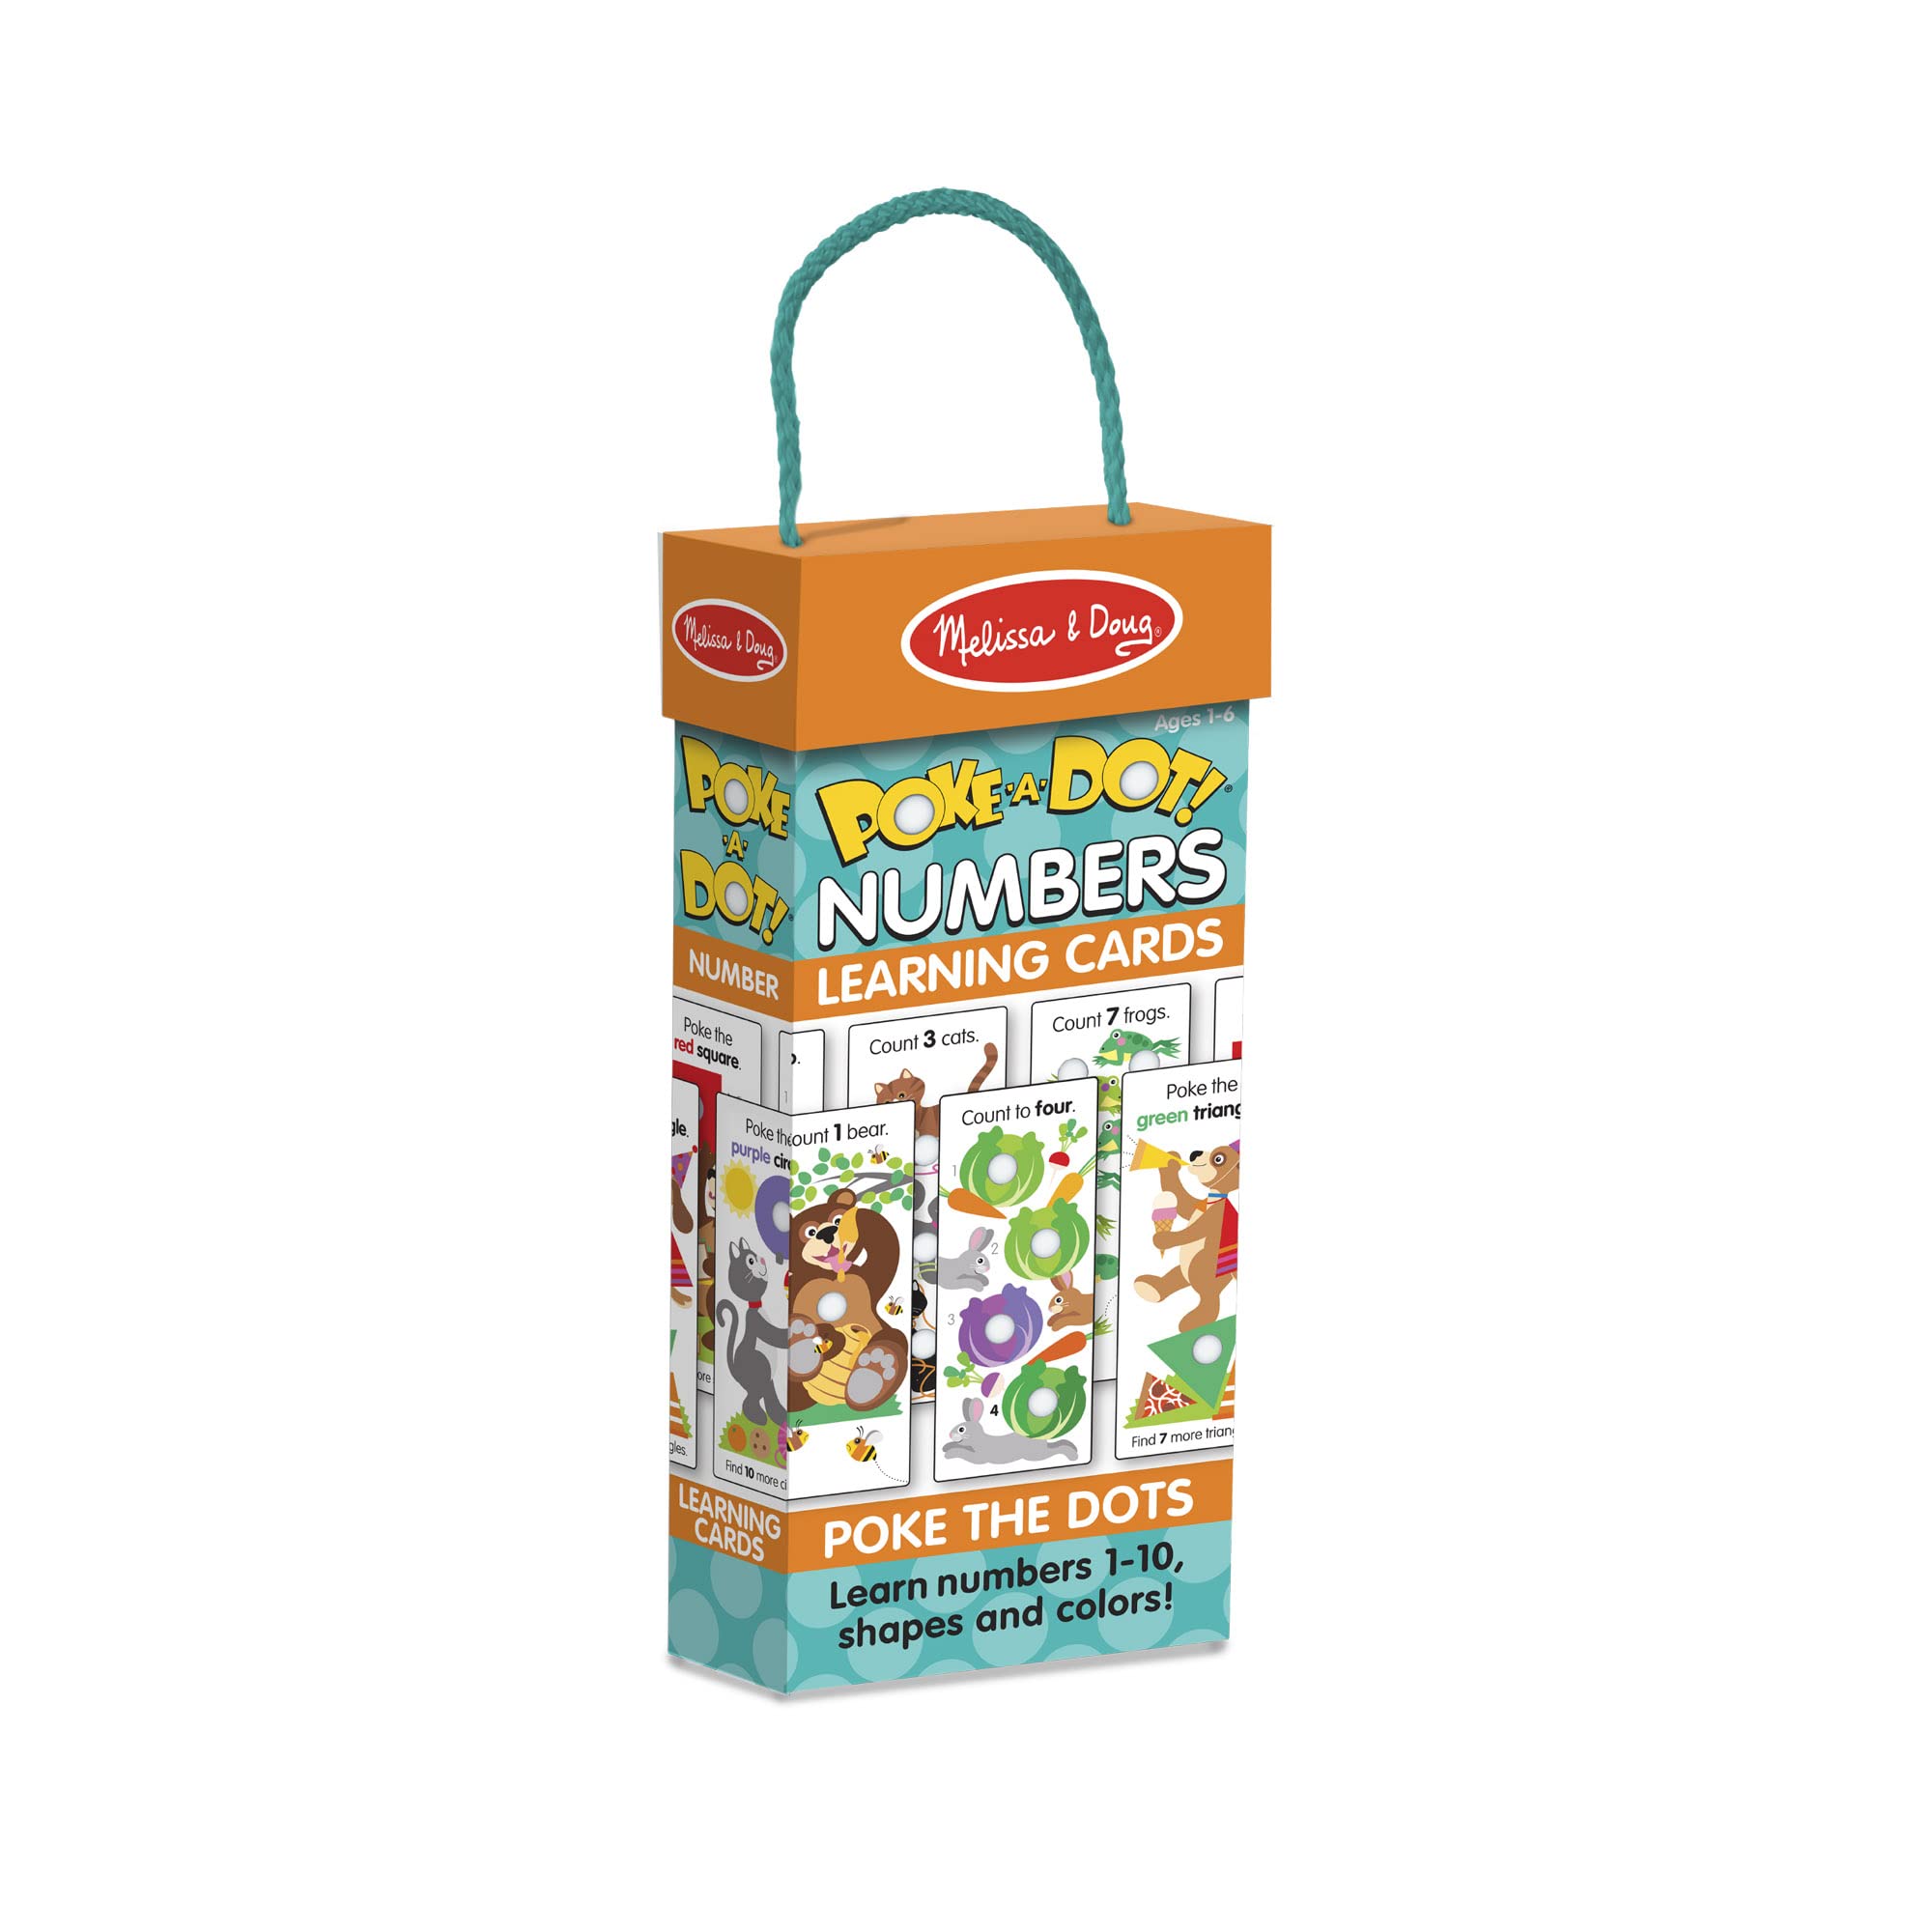 Melissa & Doug Poke-A-Dot Jumbo Number Learning Cards - 13 Double-Sided Numbers, Shapes, and Colors Cards with Buttons to Pop - Poke A Dot Book Oversized Interactive Learning Activity Cards For Kids